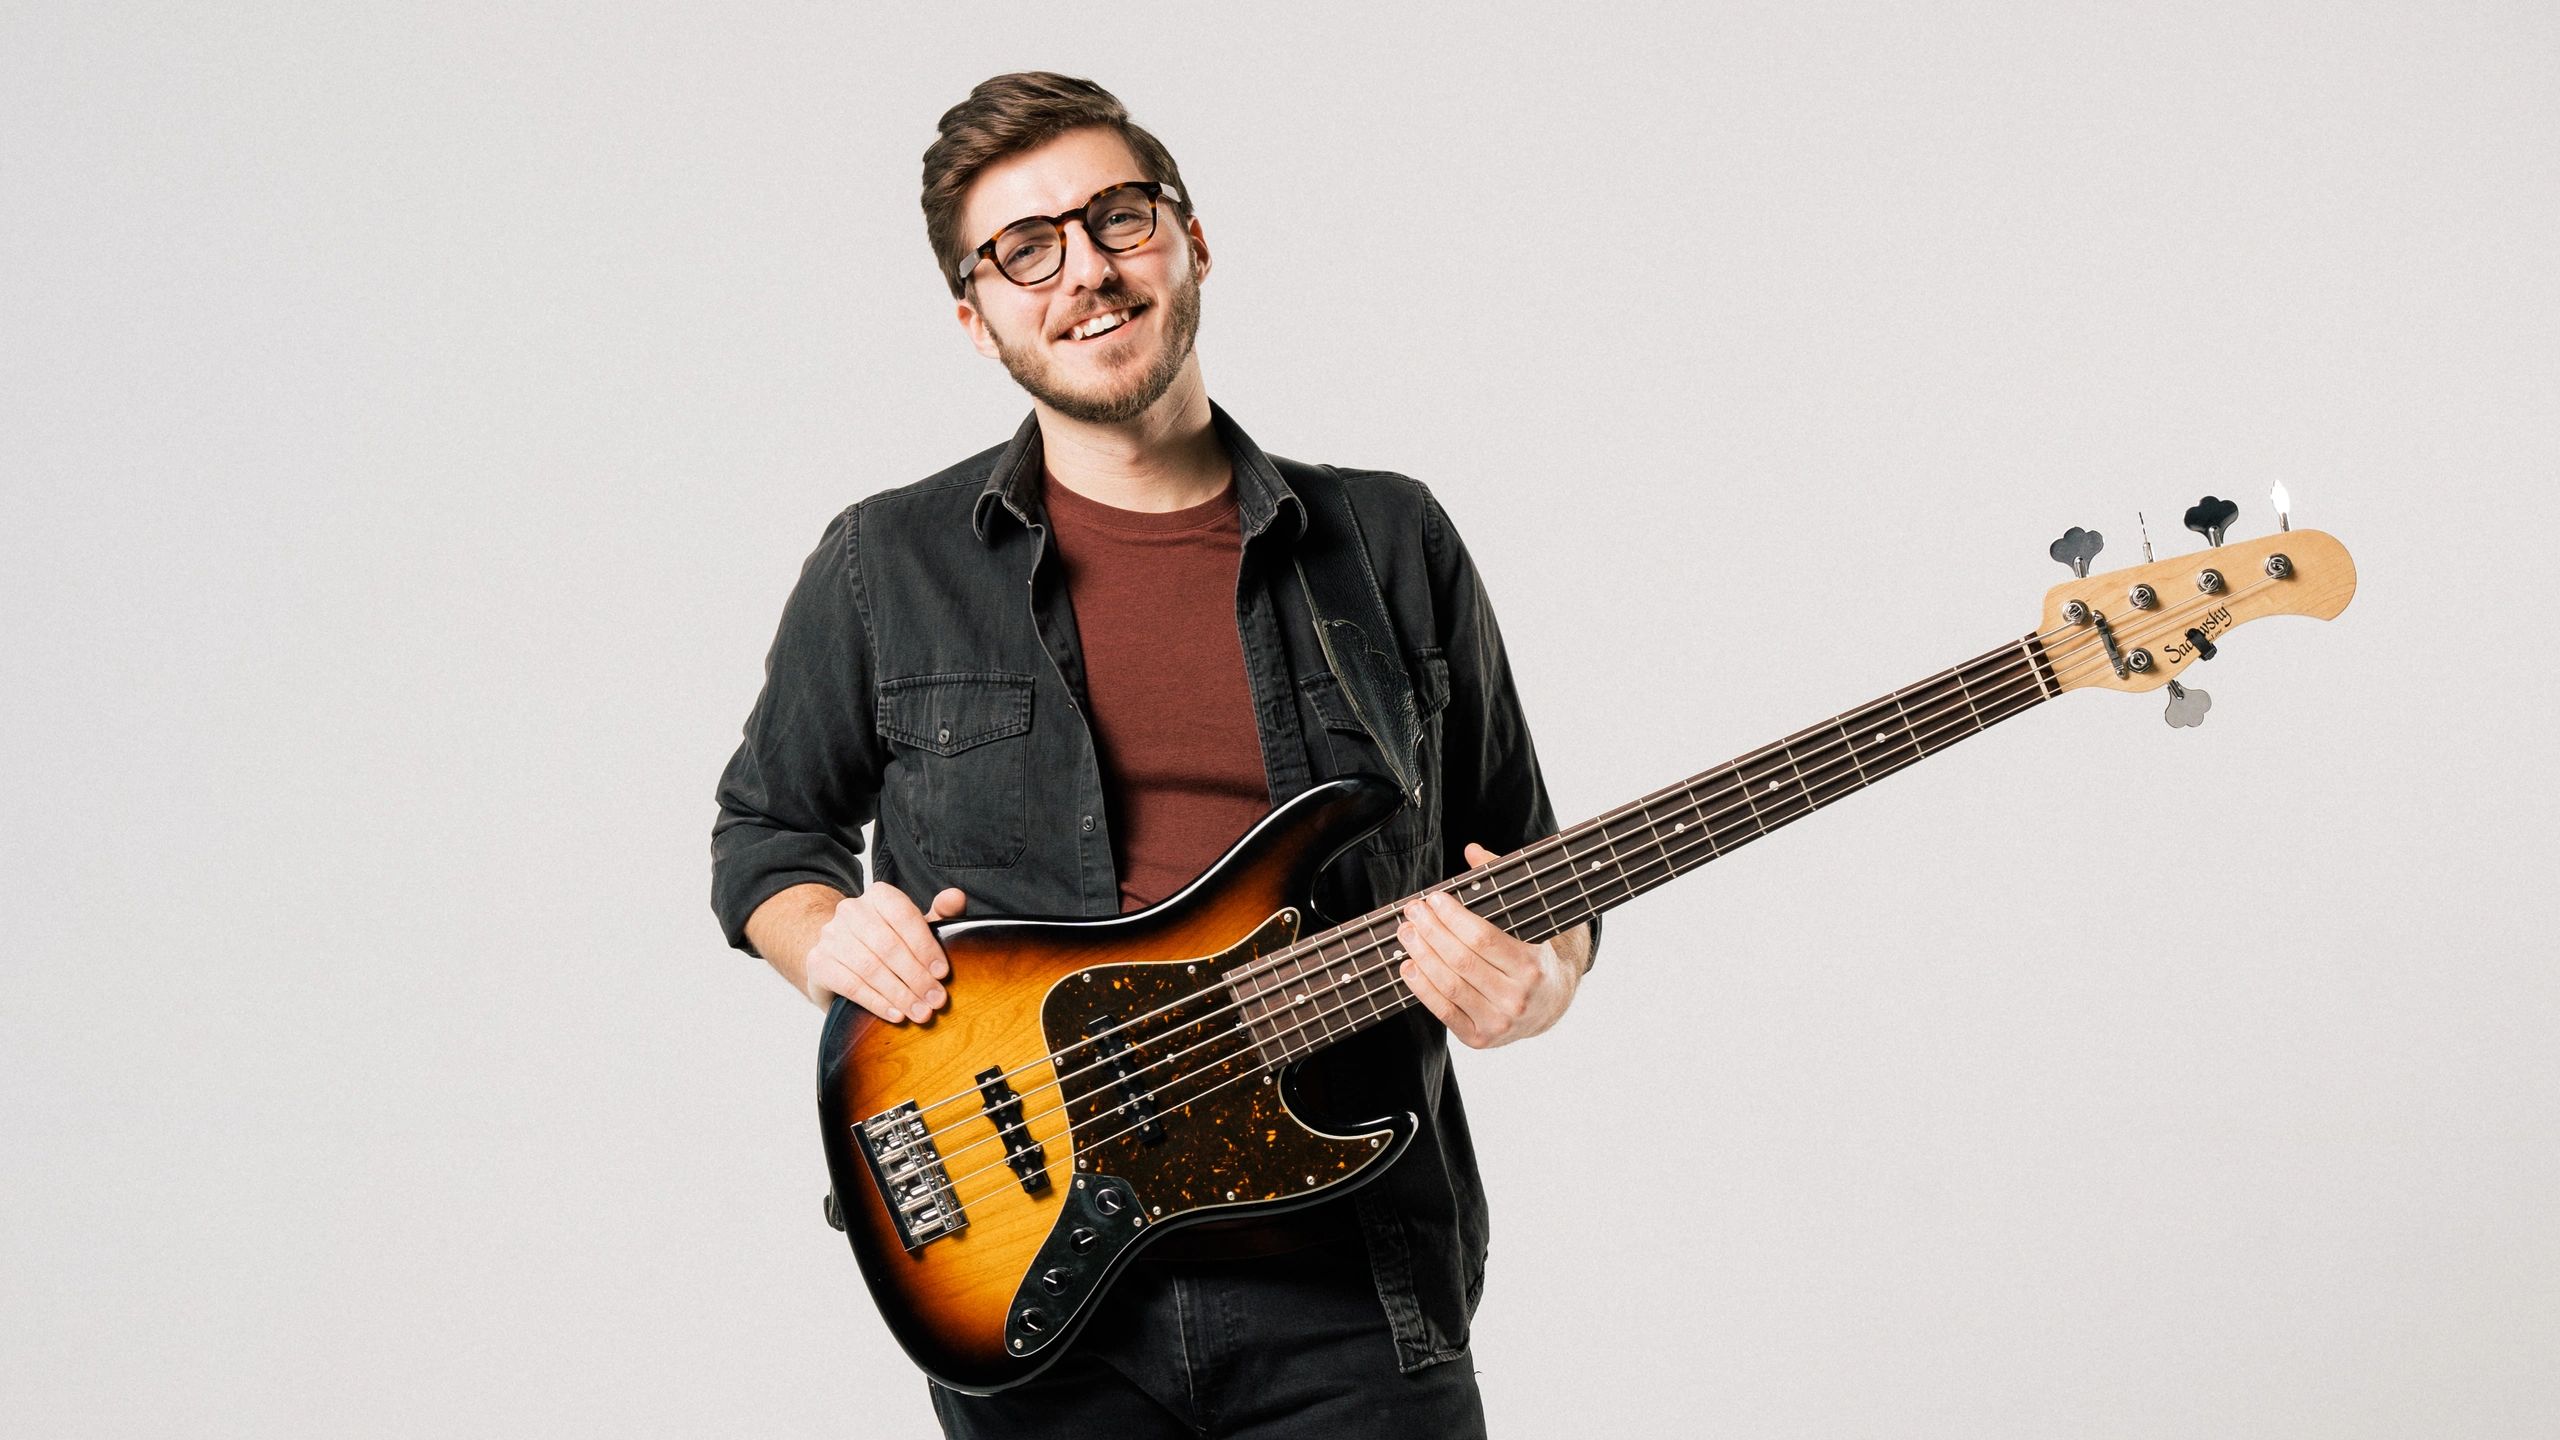 Smiling musician holding electric bass guitar. Photo credit: Skinny